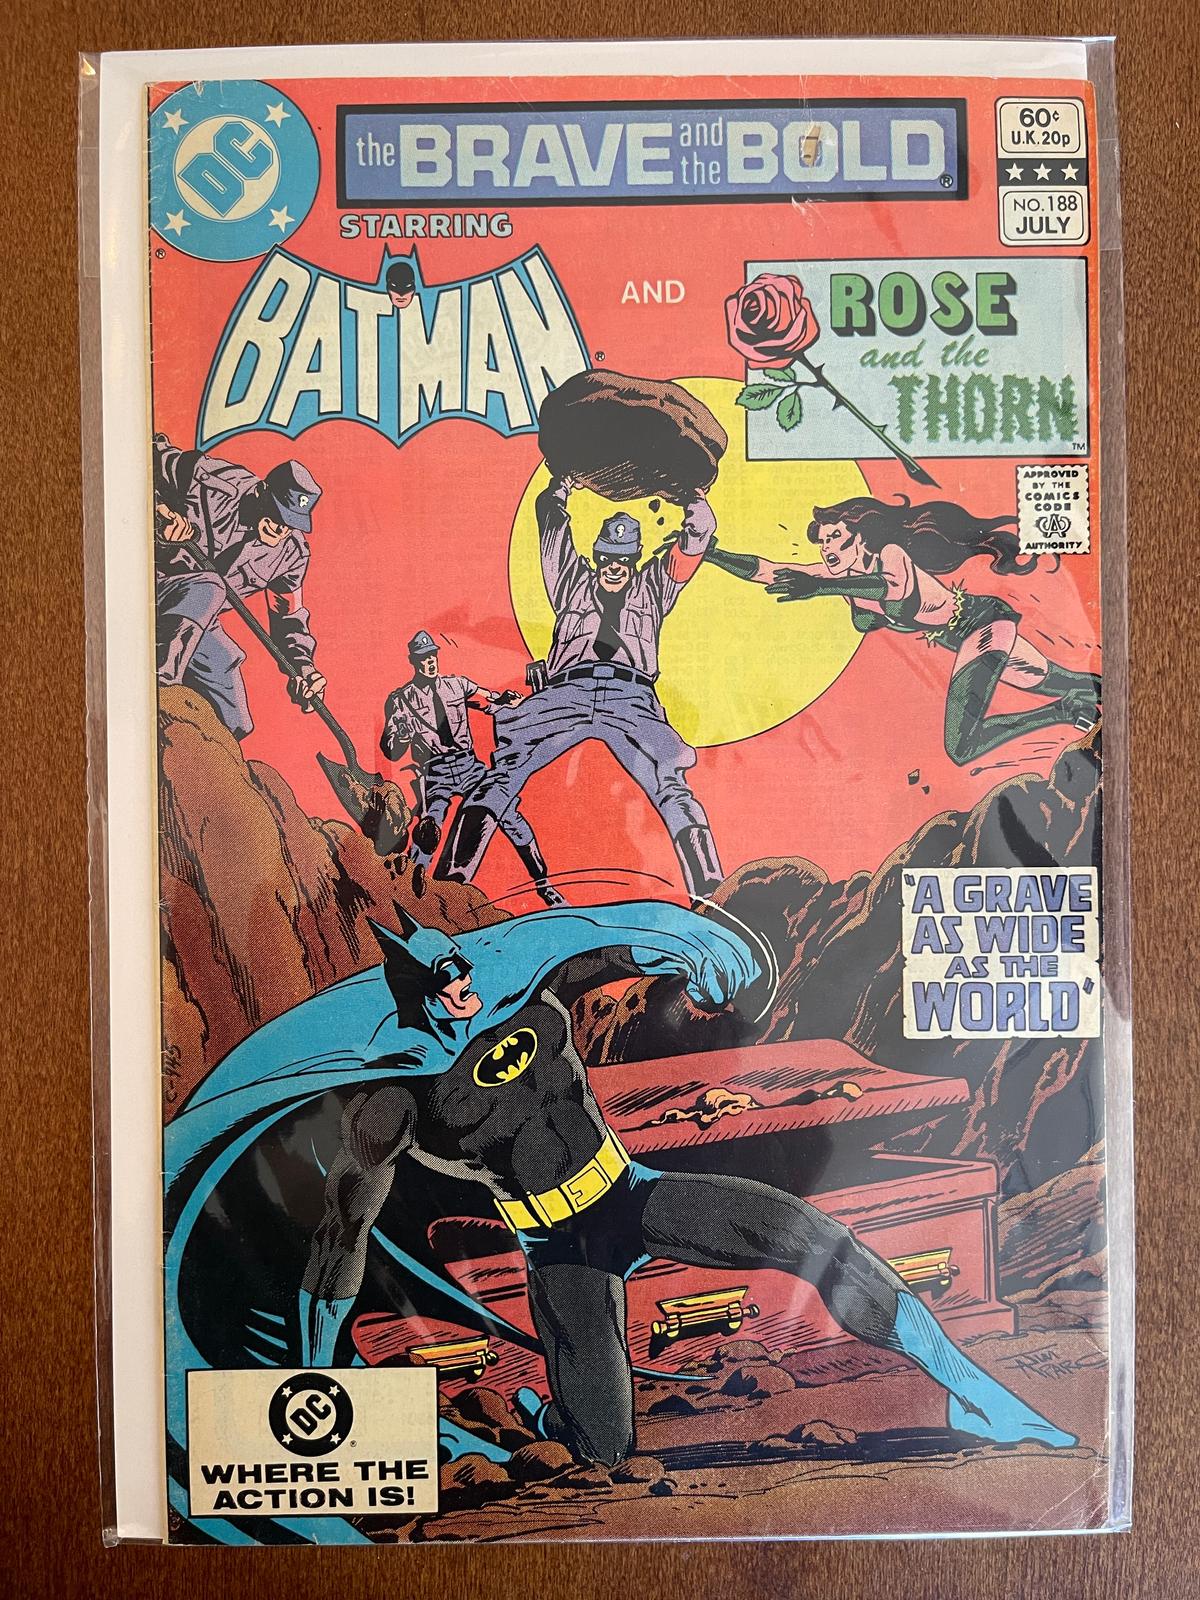 The Brave & the Bold Comic #188 DC Comics Batman Rose and the Thorn 1982 Bronze Age